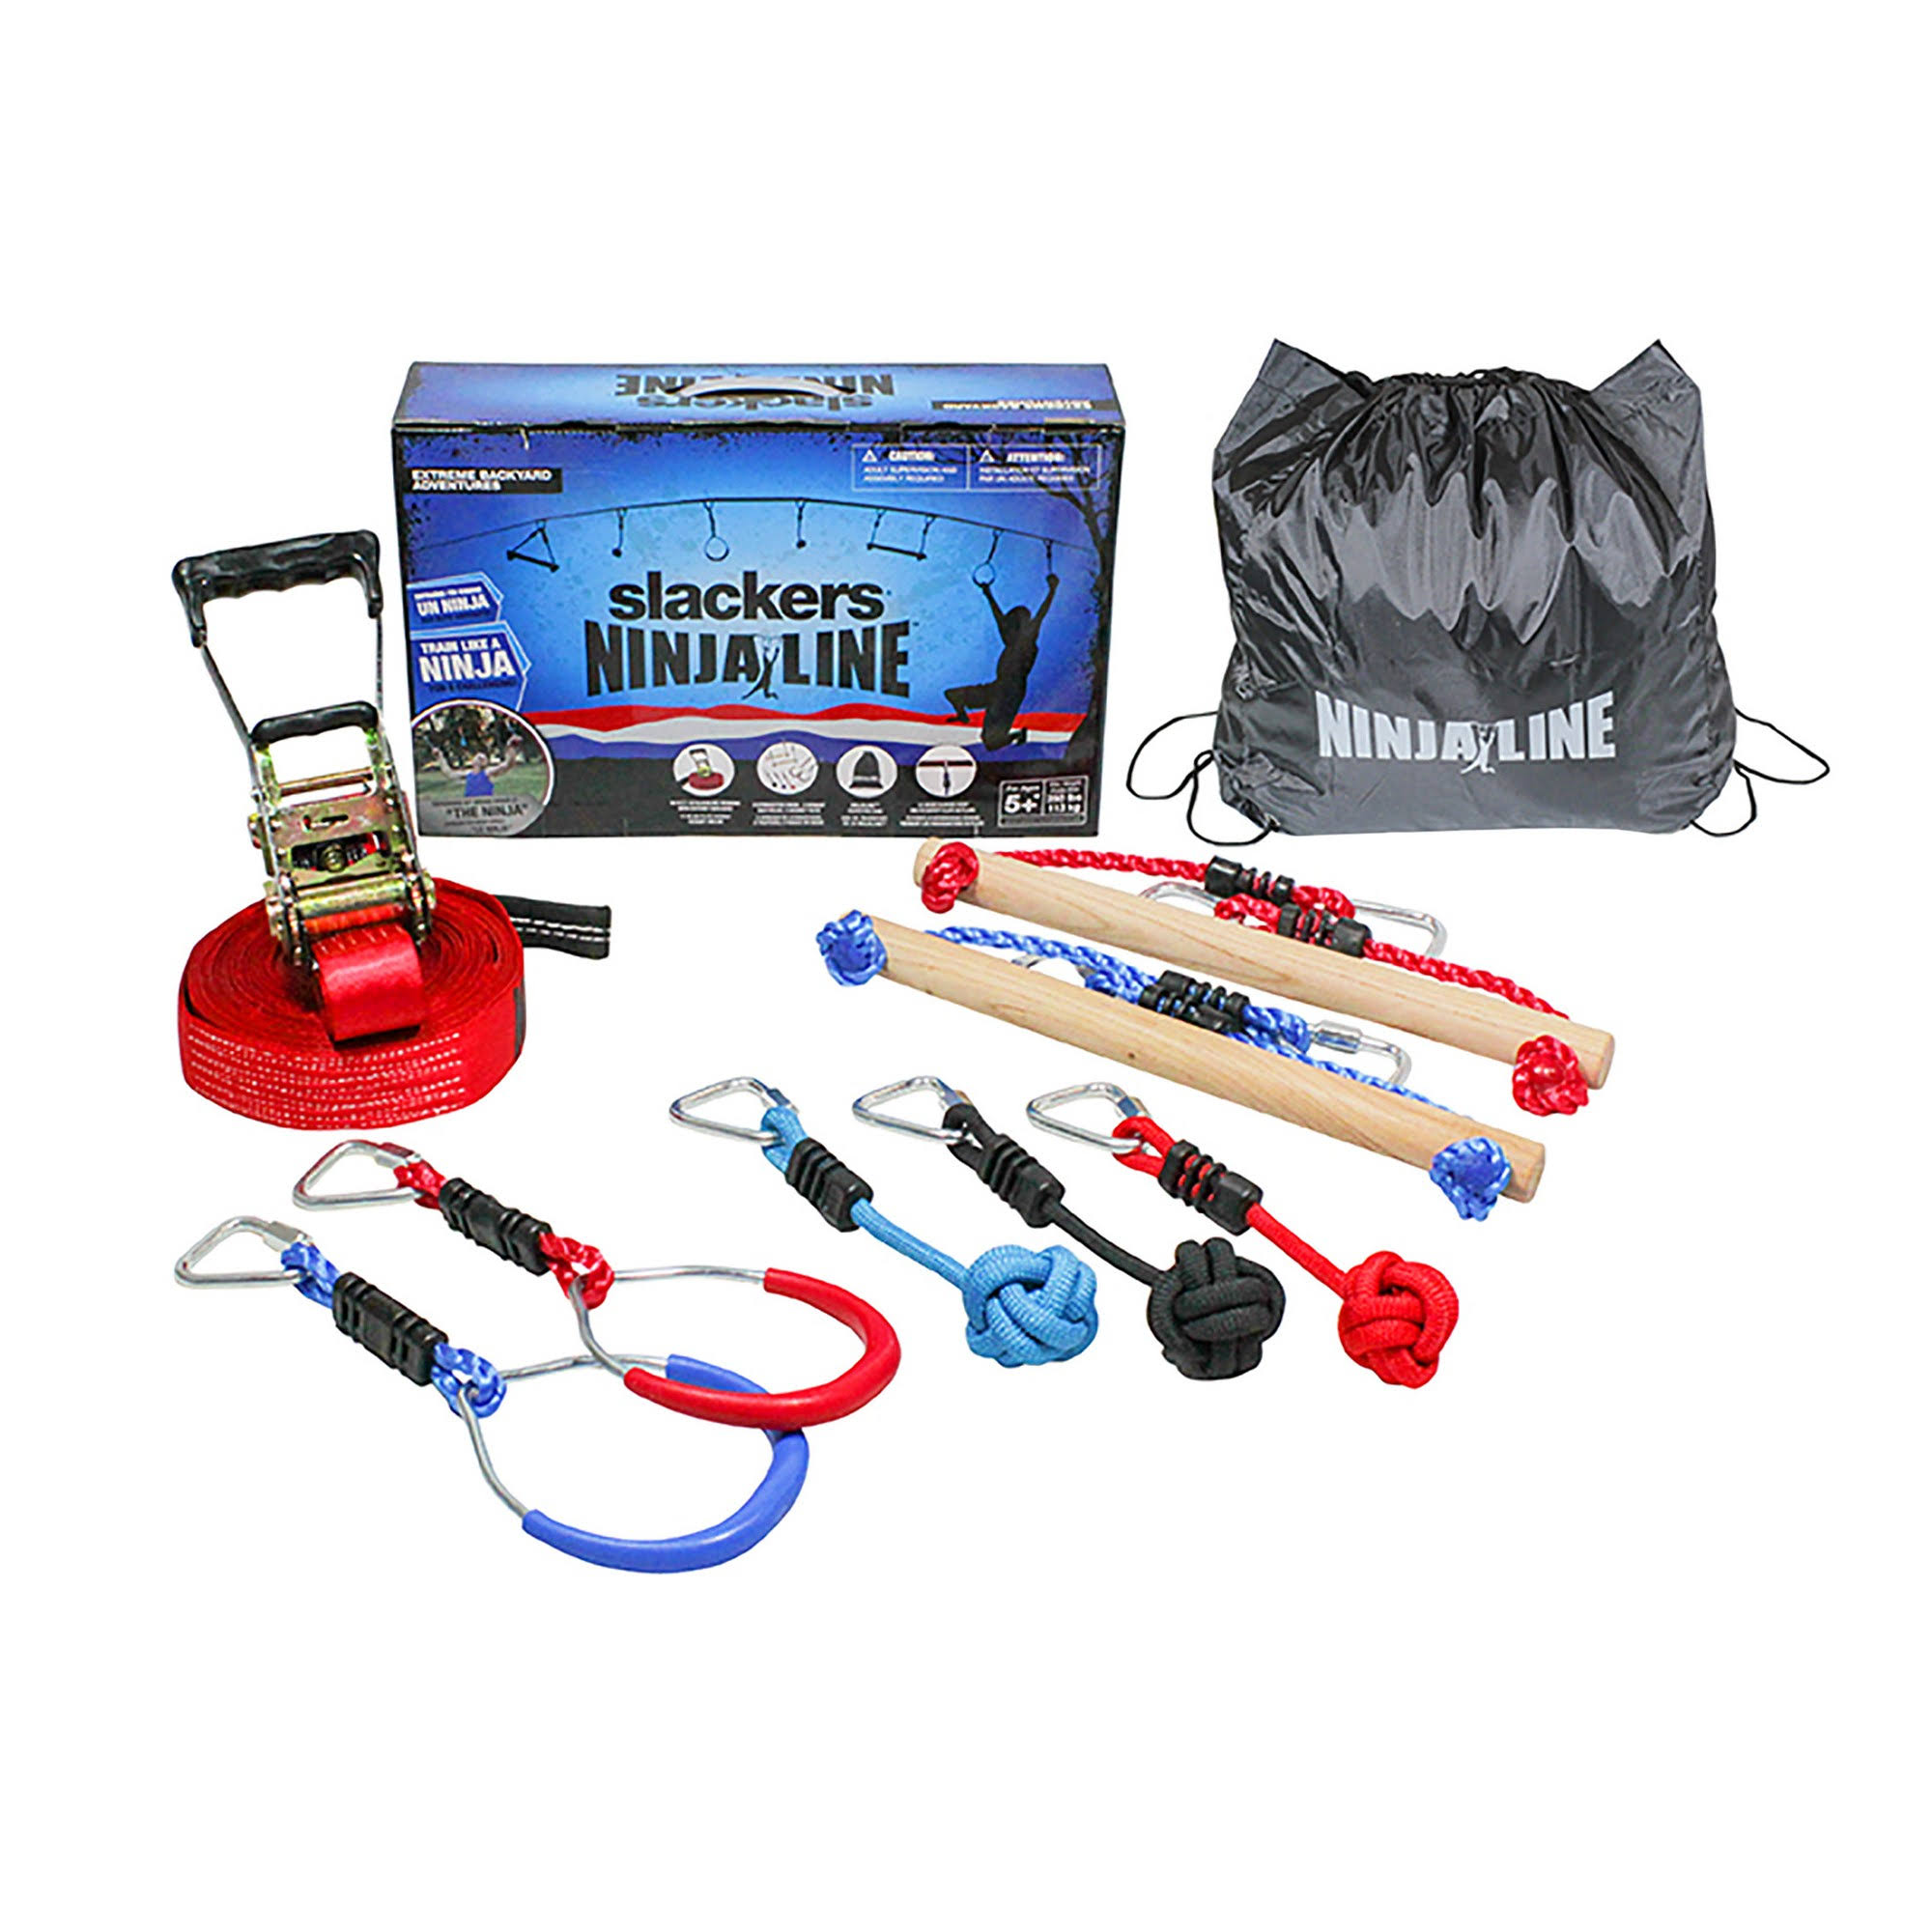 Slackers Ninja Line Intro Kit with 7 Obstacles